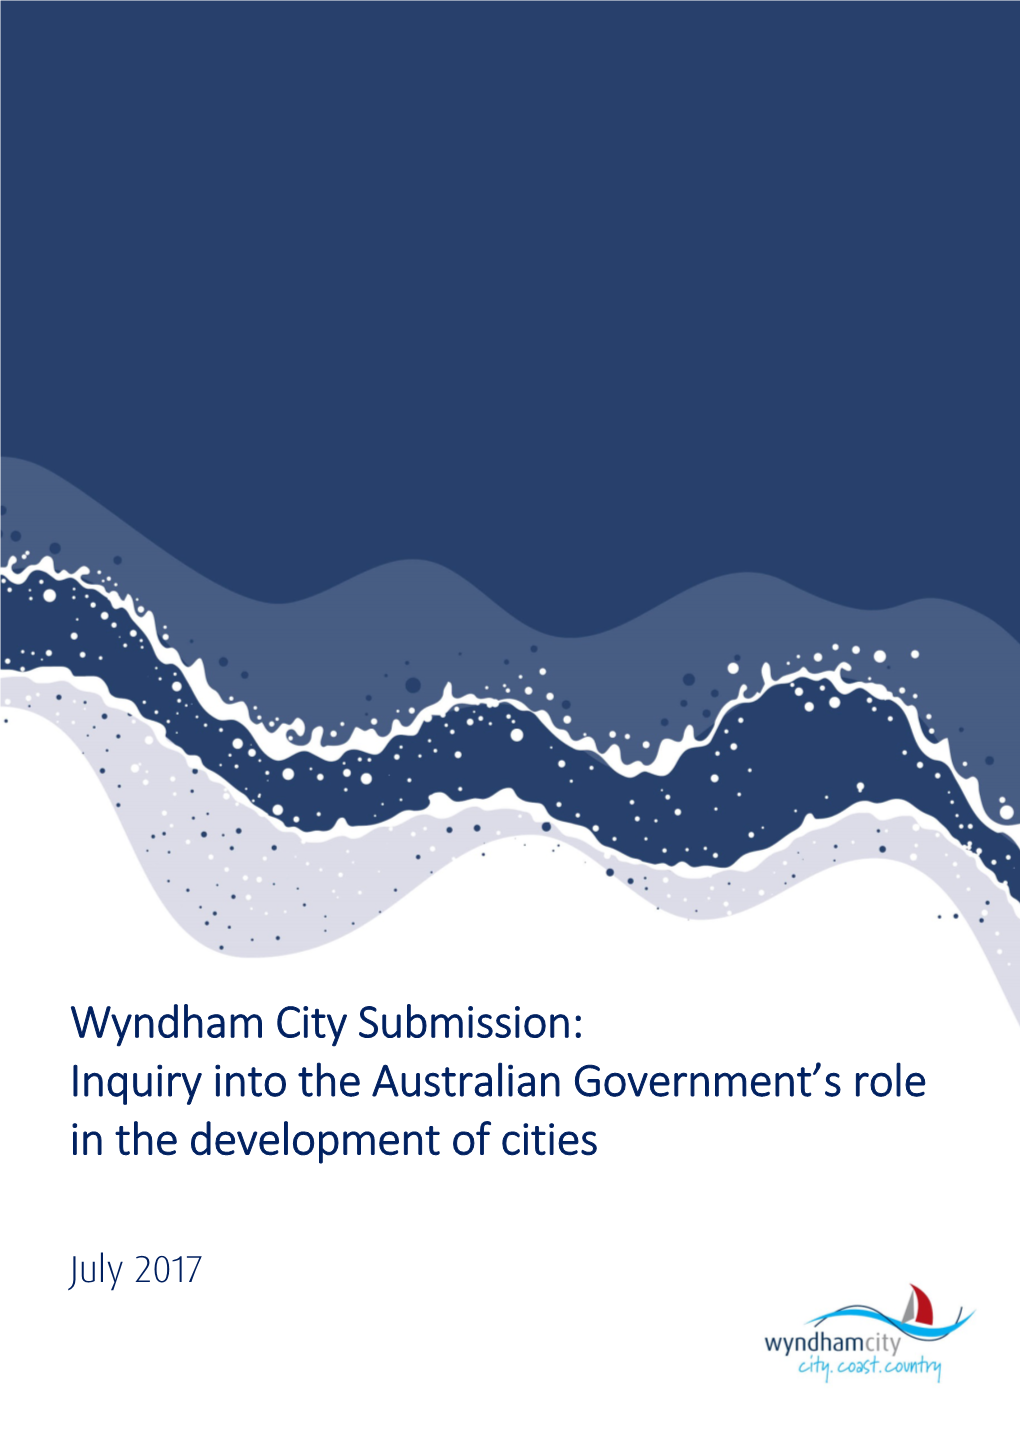 Wyndham City Submission: Inquiry Into the Australian Government's